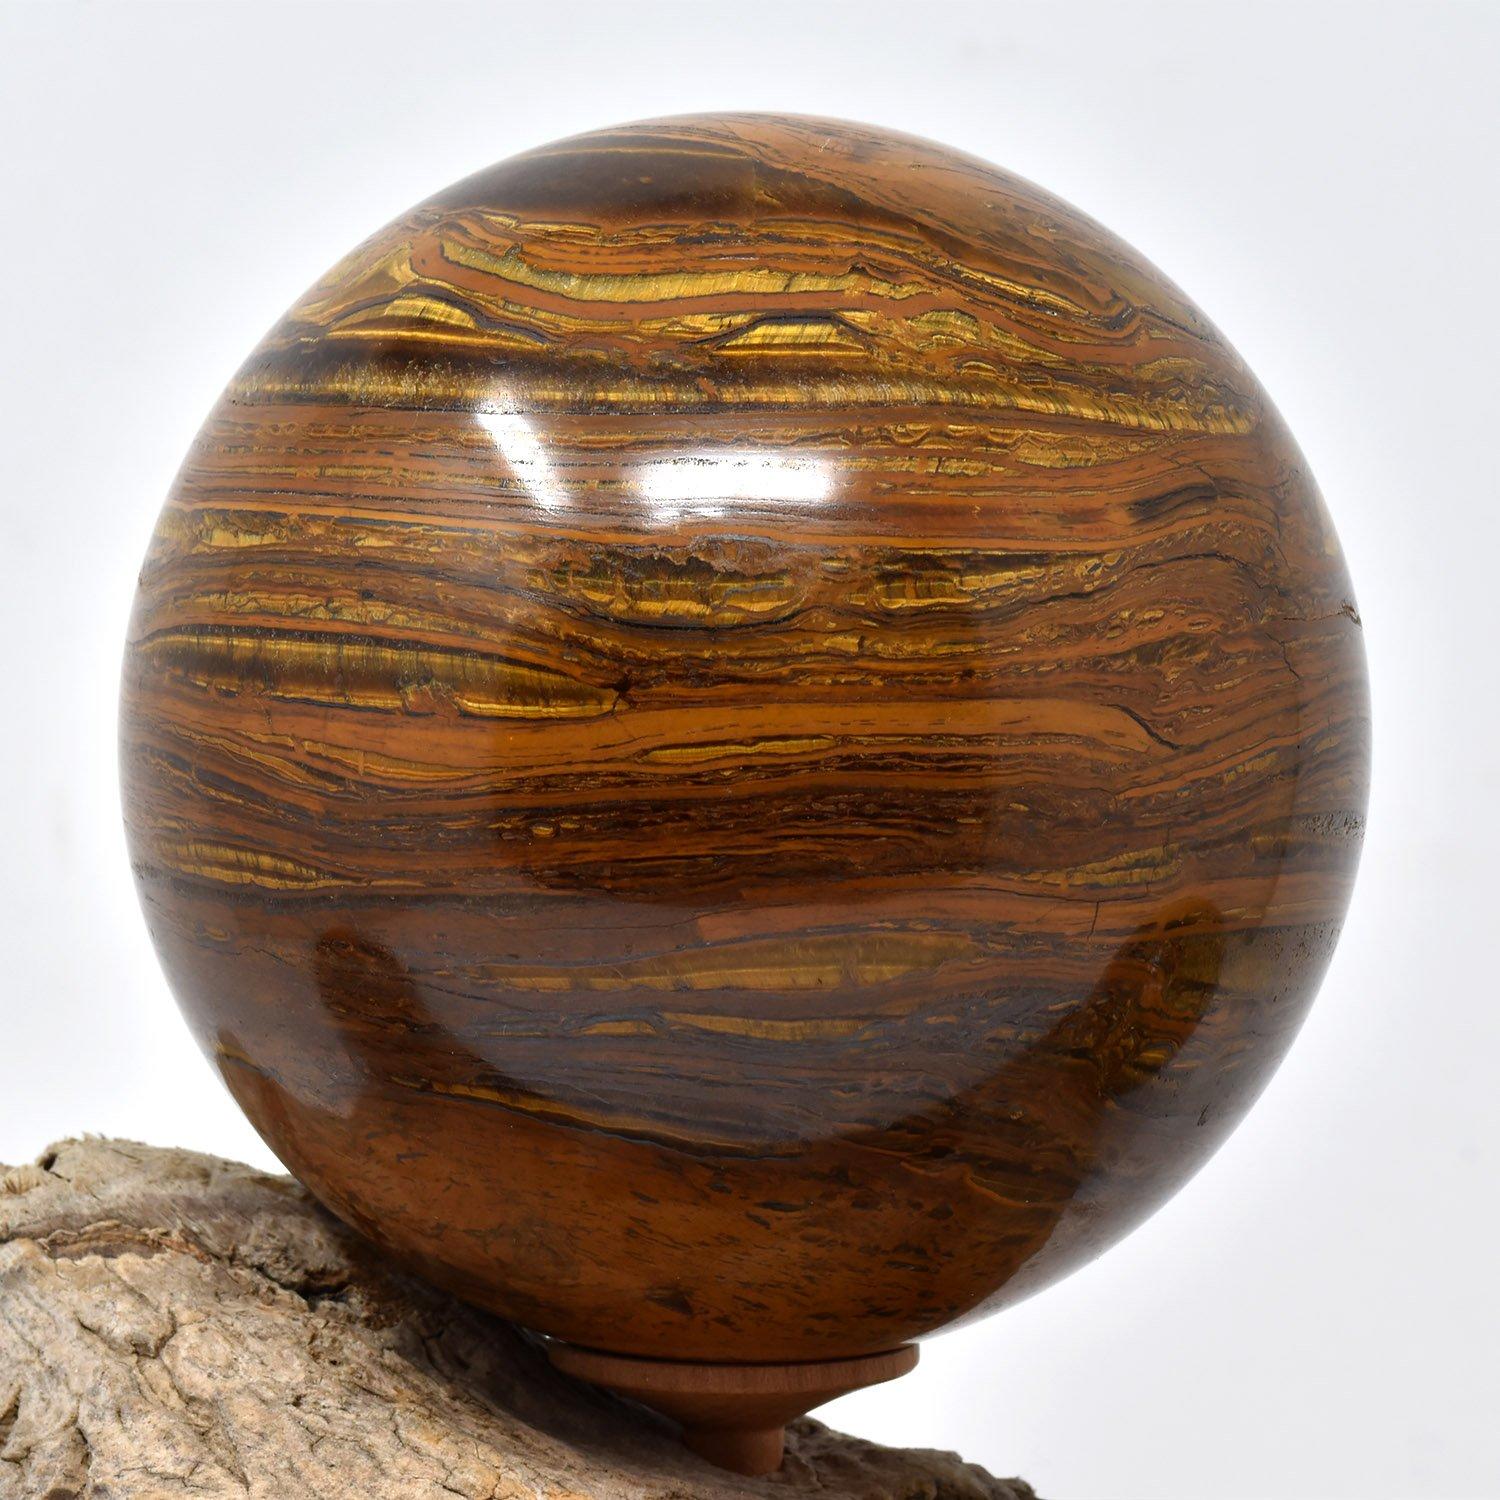 Contemporary Three Mineral Spheres Mounted on an Organic Wood Branch